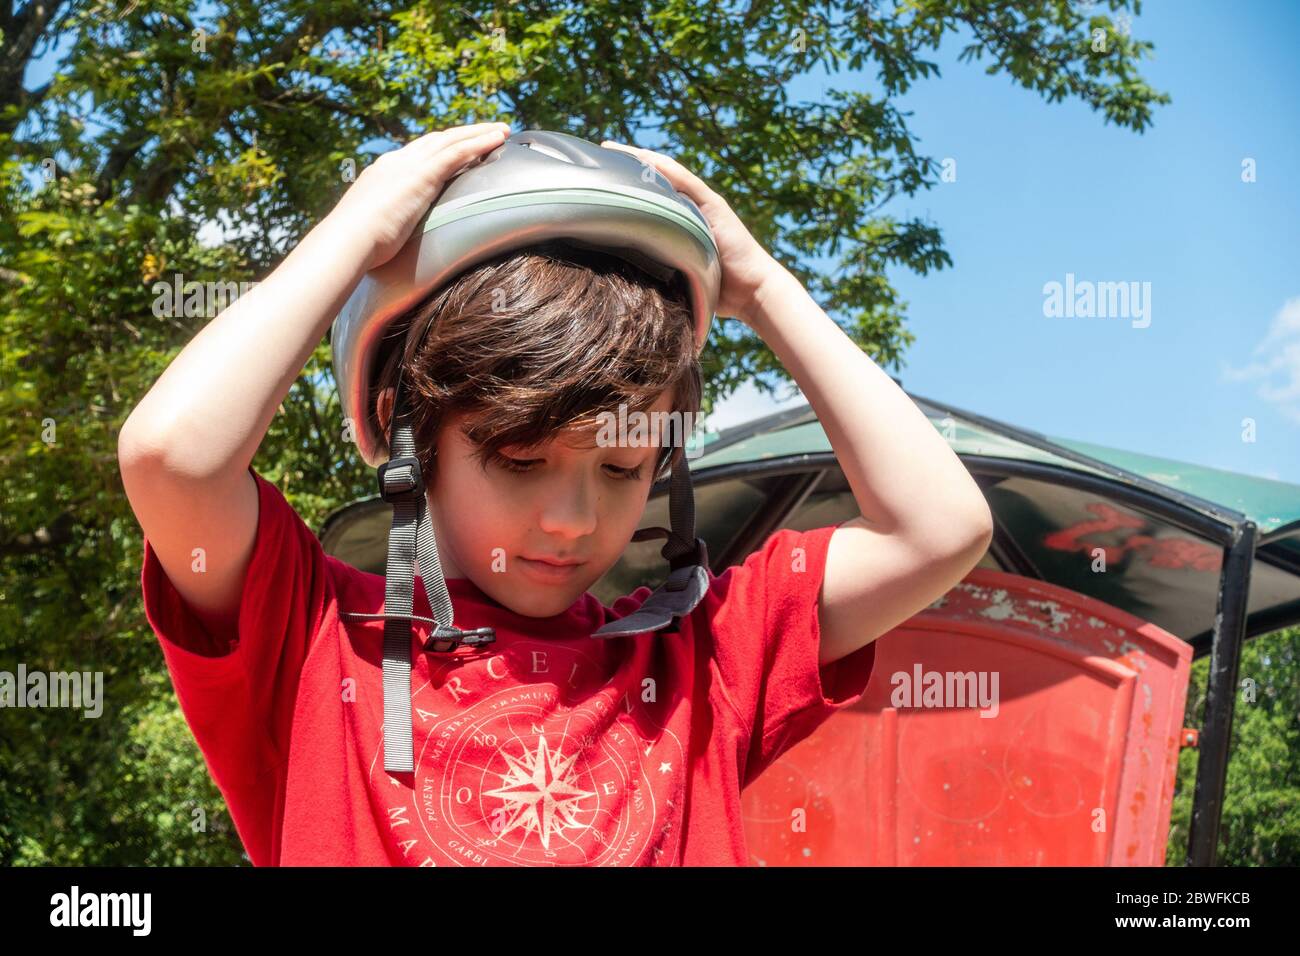 A young child putting on a bicycle helmet in the park, fastens a buckle on a chin strap. Stock Photo